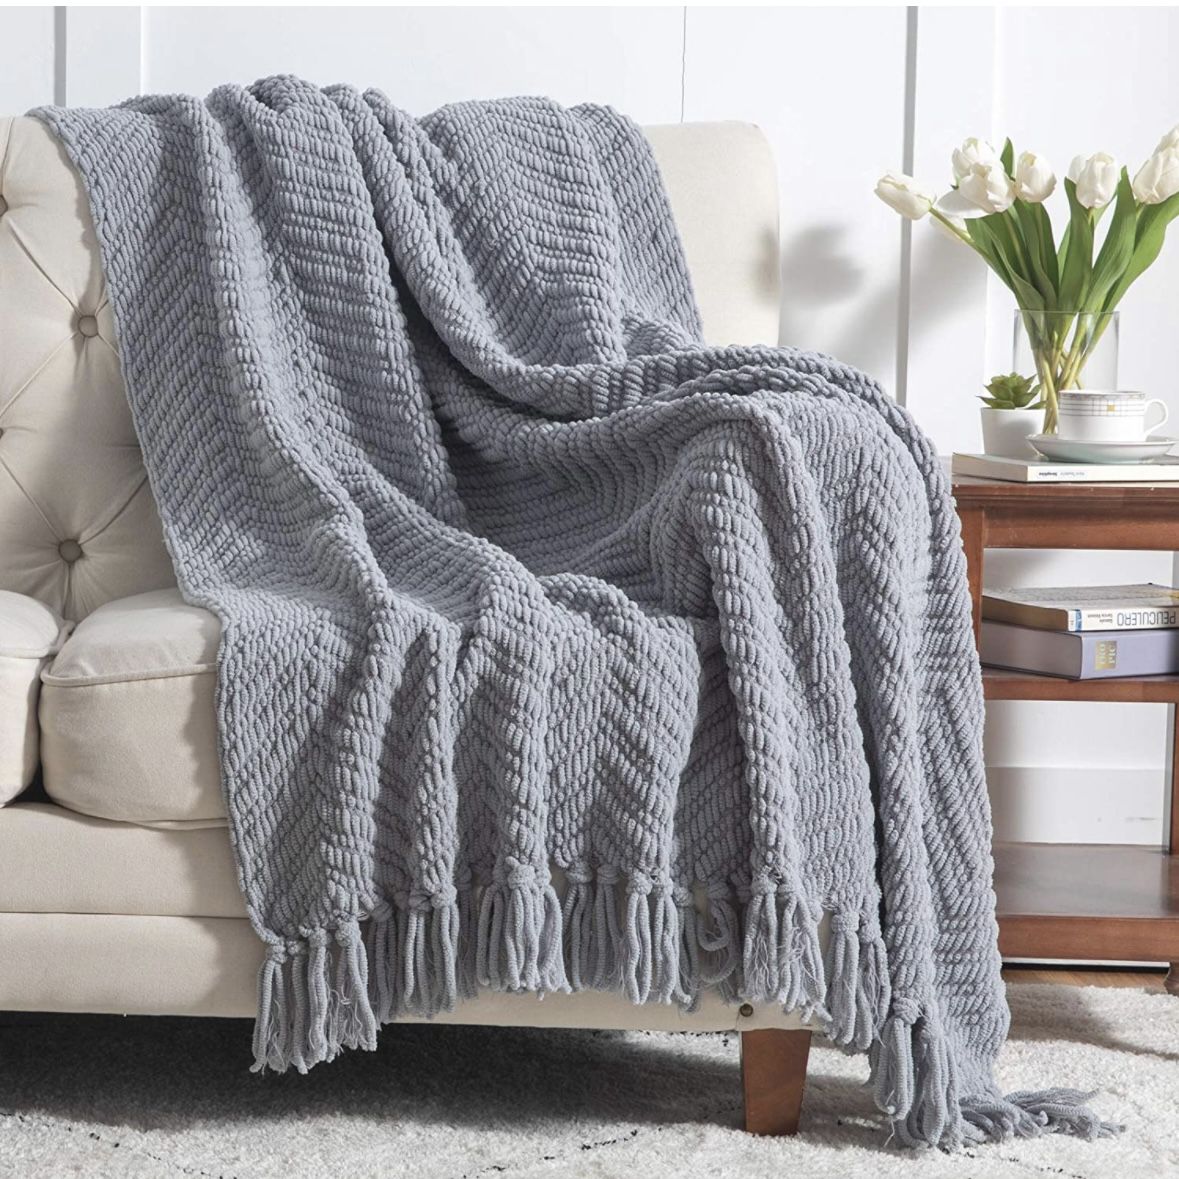 Throw Blanket for Couch 